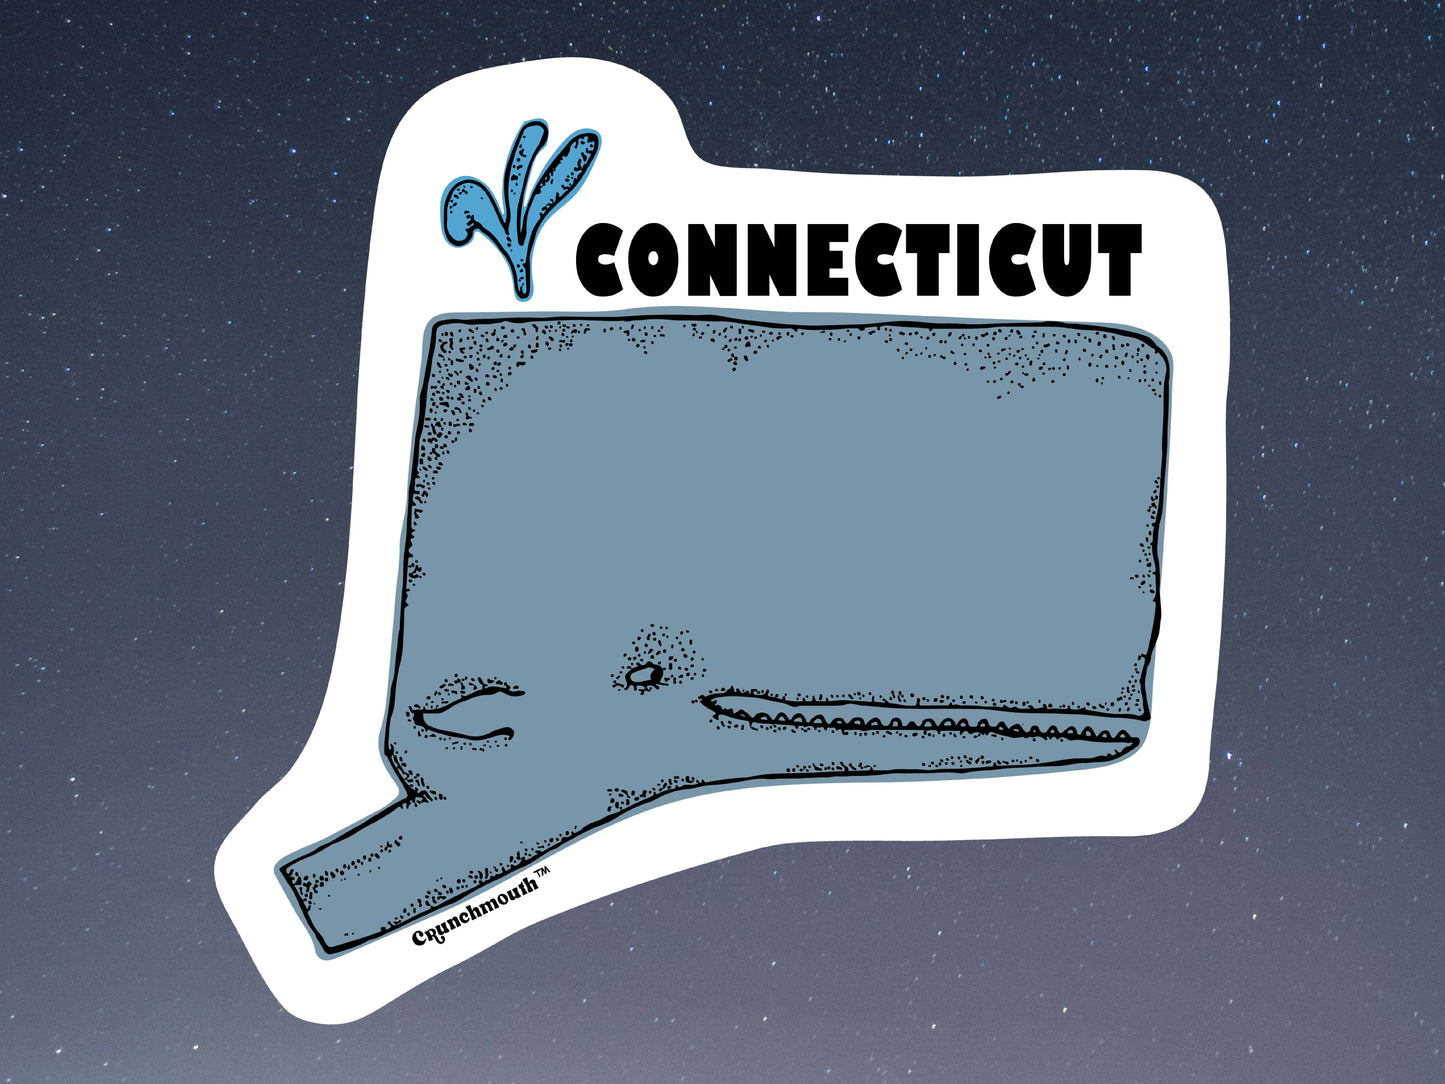 connecticut state whale sticker, night sky background